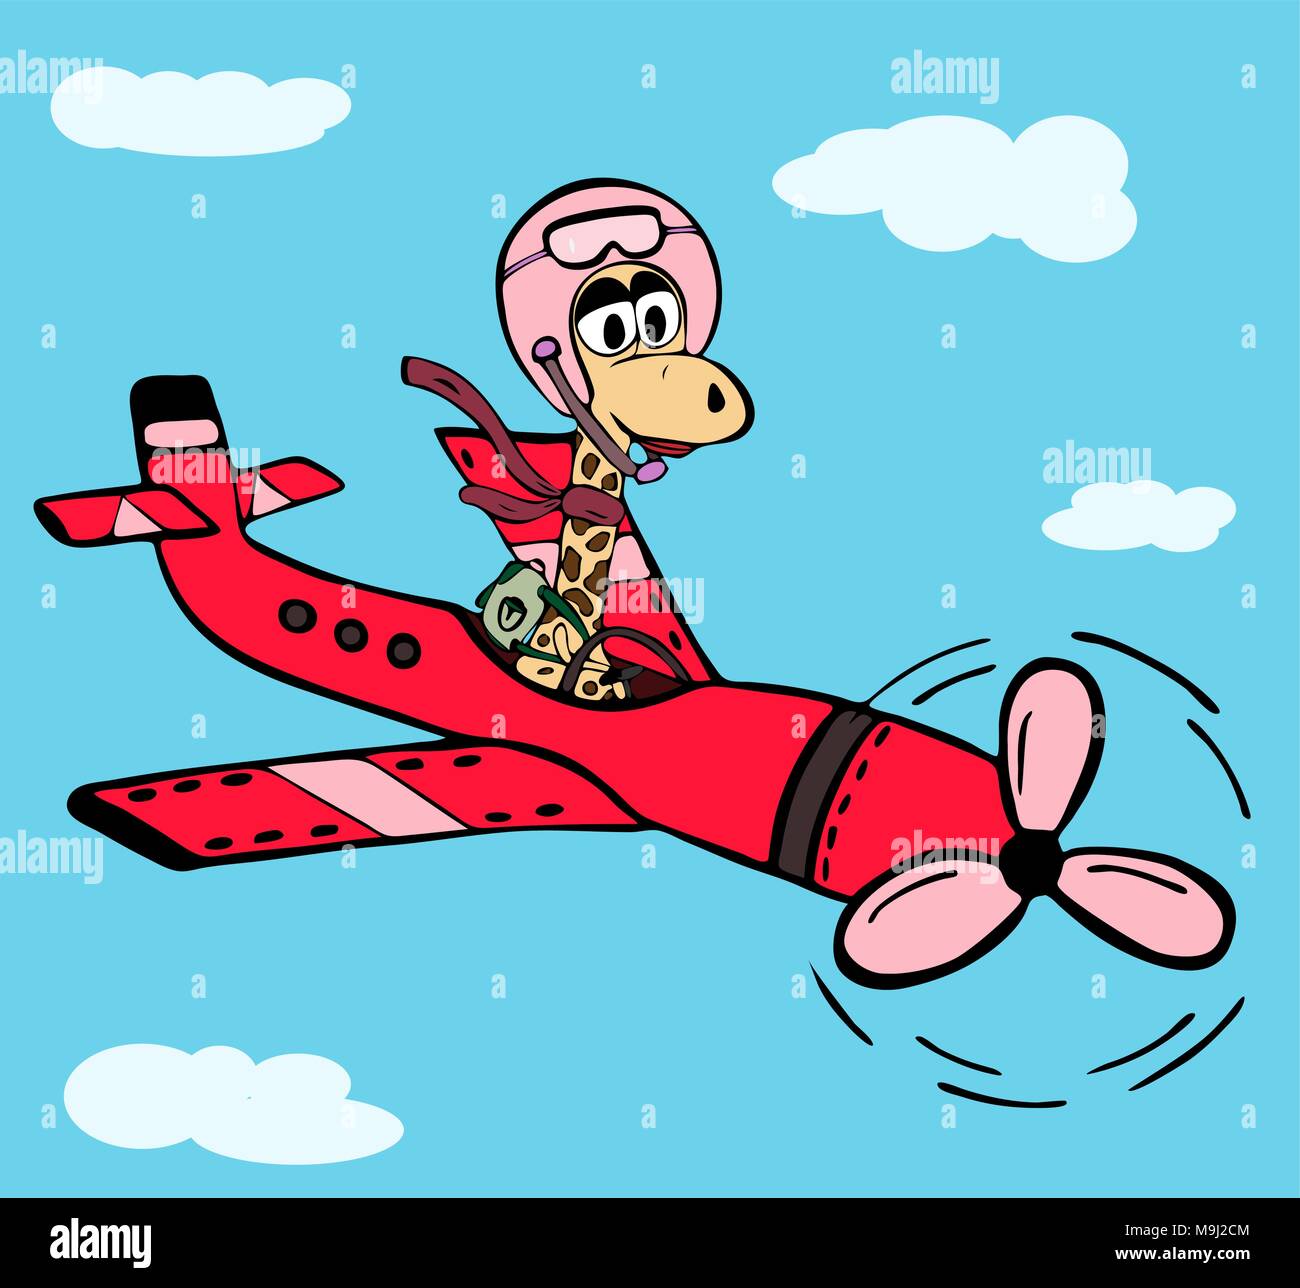 girl giraffe in a pink helmet flies in the sky amidst white clouds on a red  airplane with a propeller, funny cartoon character Stock Vector Image & Art  - Alamy